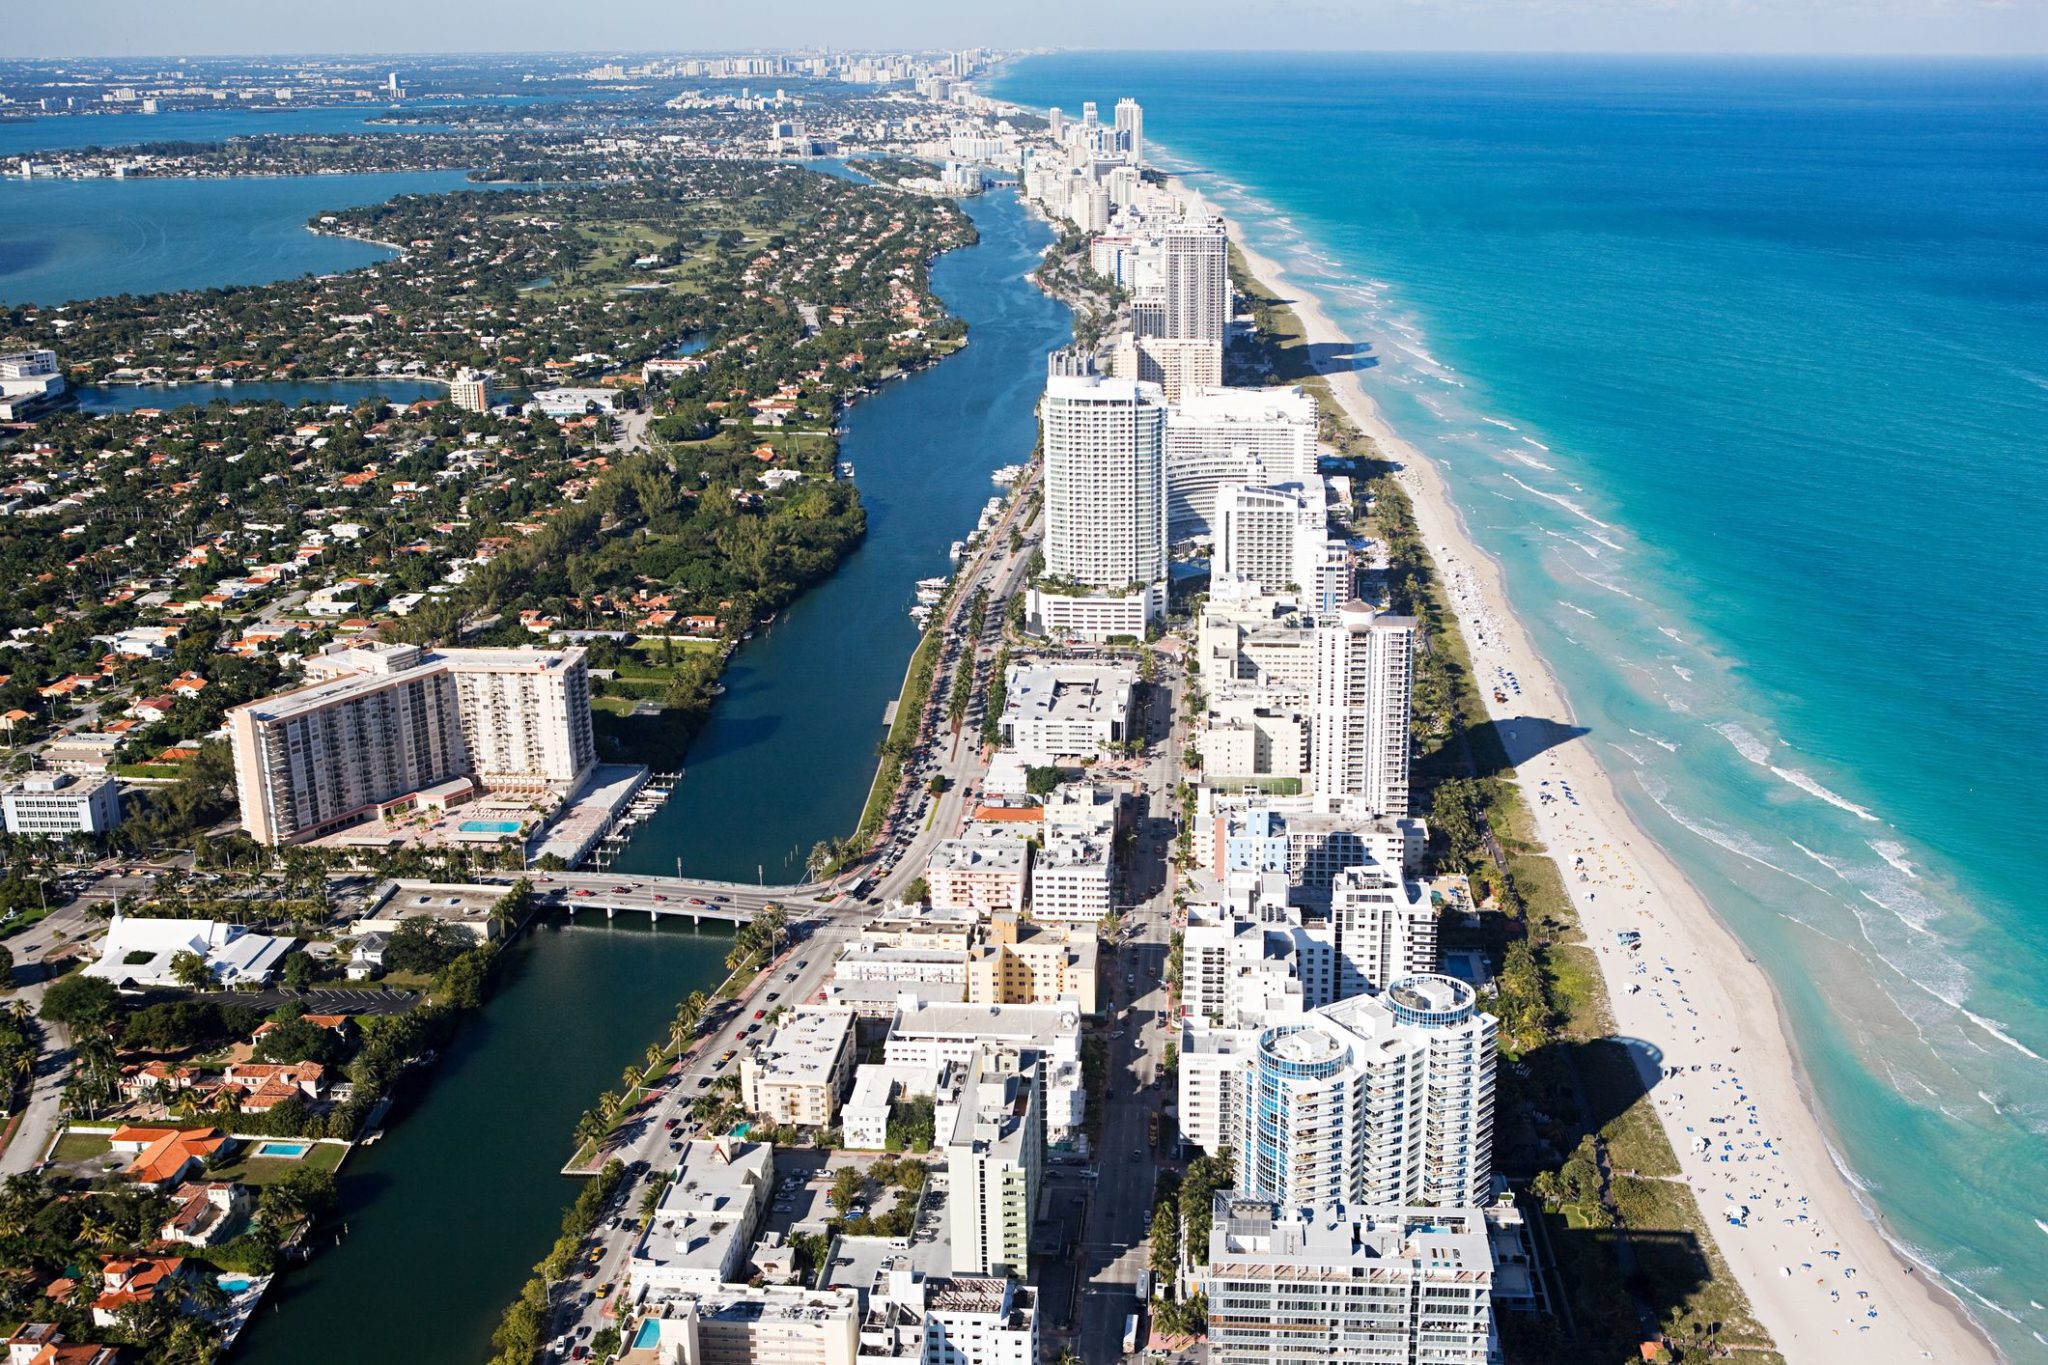 Americans Consider Florida the First Choice for Relocation, Study Says